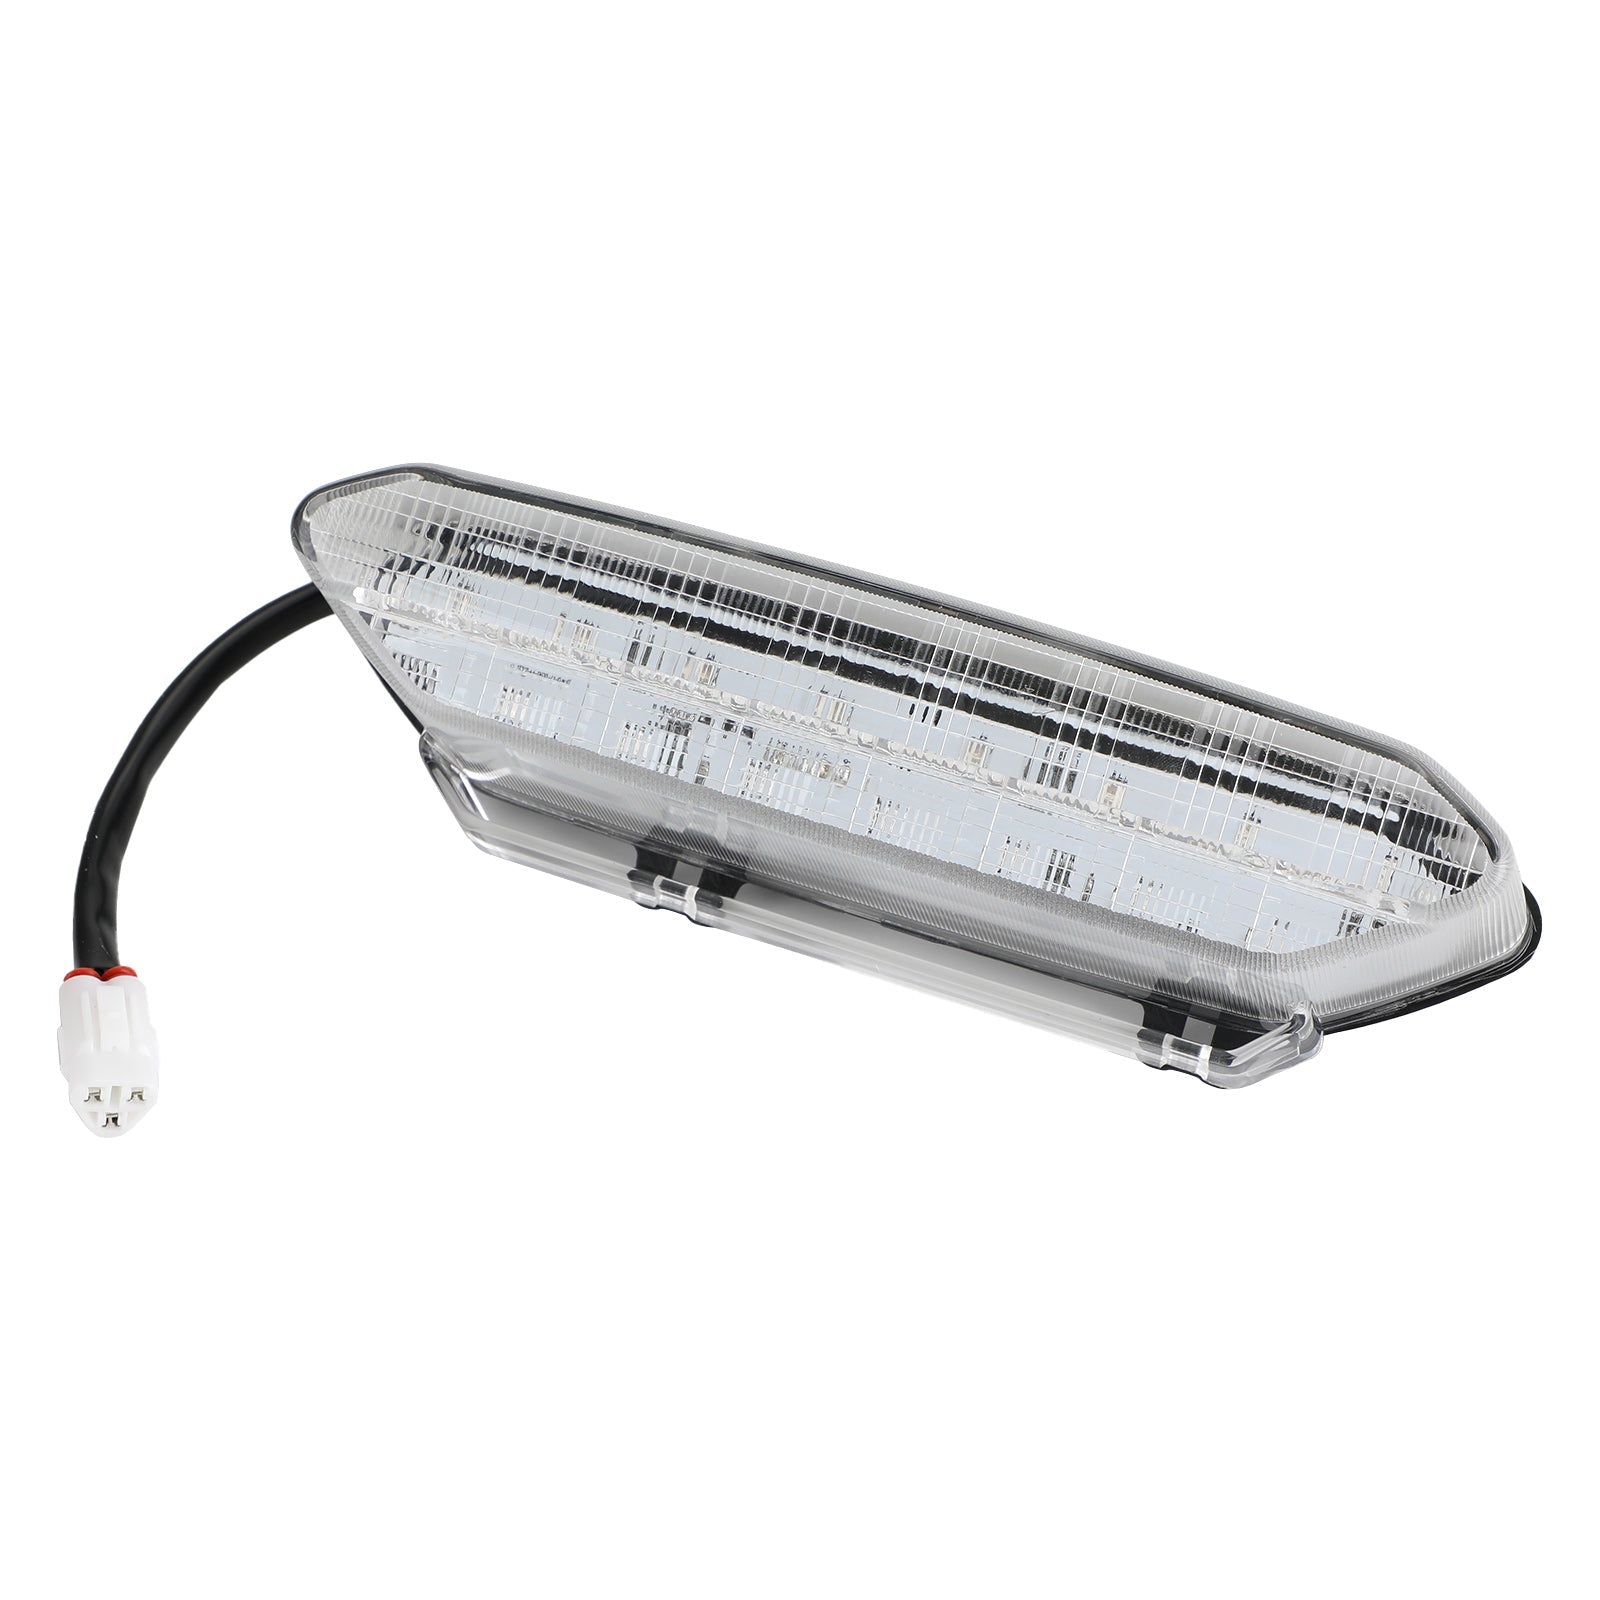 YAMAHA YFZ450 YFZ 450 2006-2009 5TG-84710-21-00 Fanale posteriore a LED Fanale posteriore